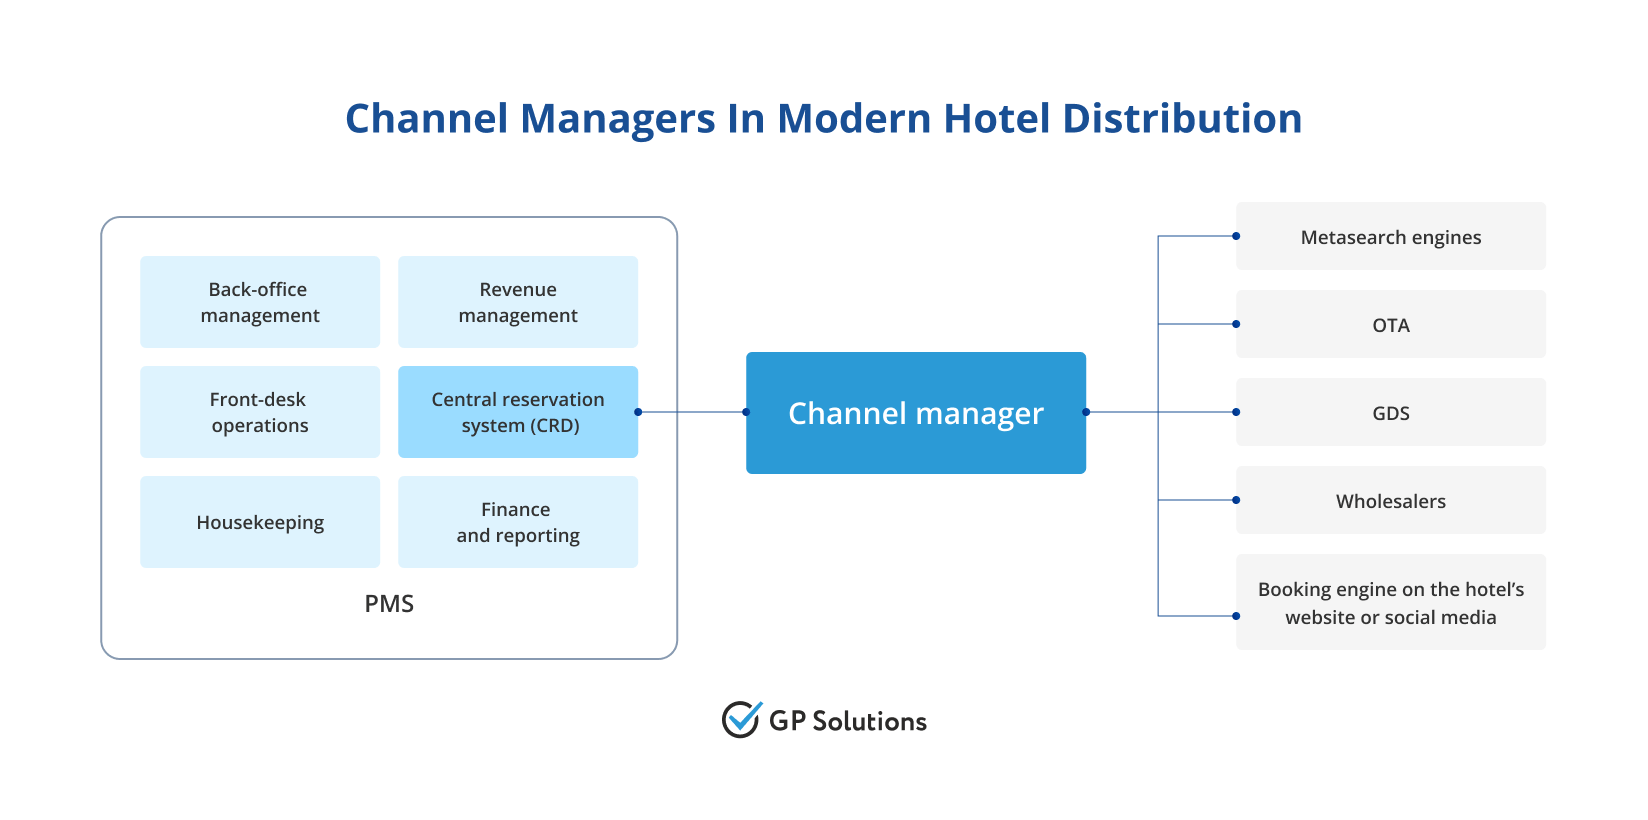 Channel managers in modern hotel distribution